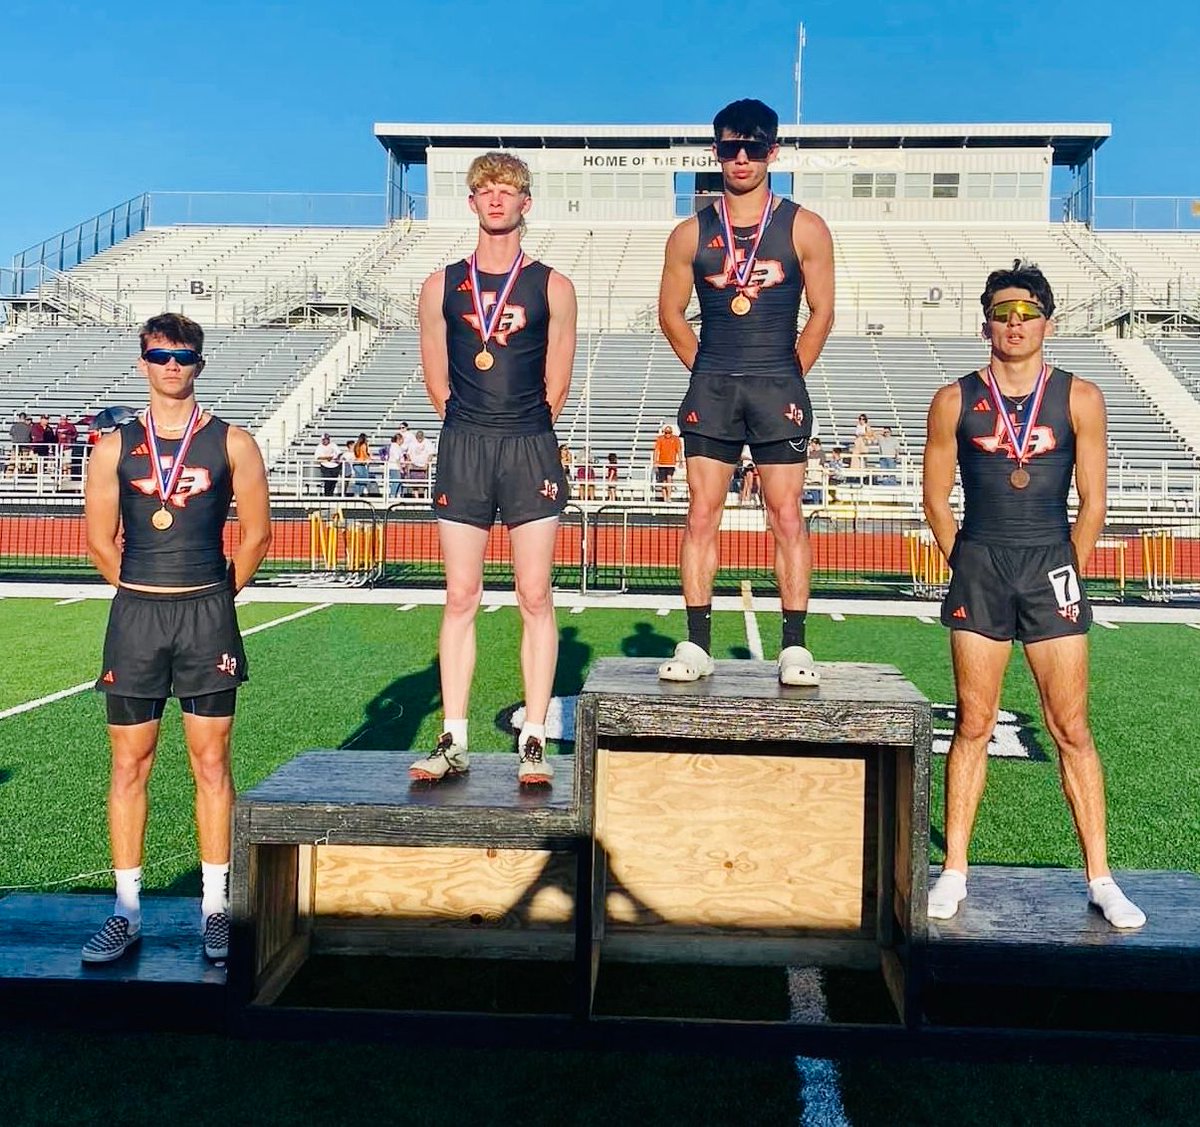 Orange Grove Boys Mile Relay team has advanced to Regionals!!!! They came in 4th place with a time of 3:29.76! Way to go Bulldogs!